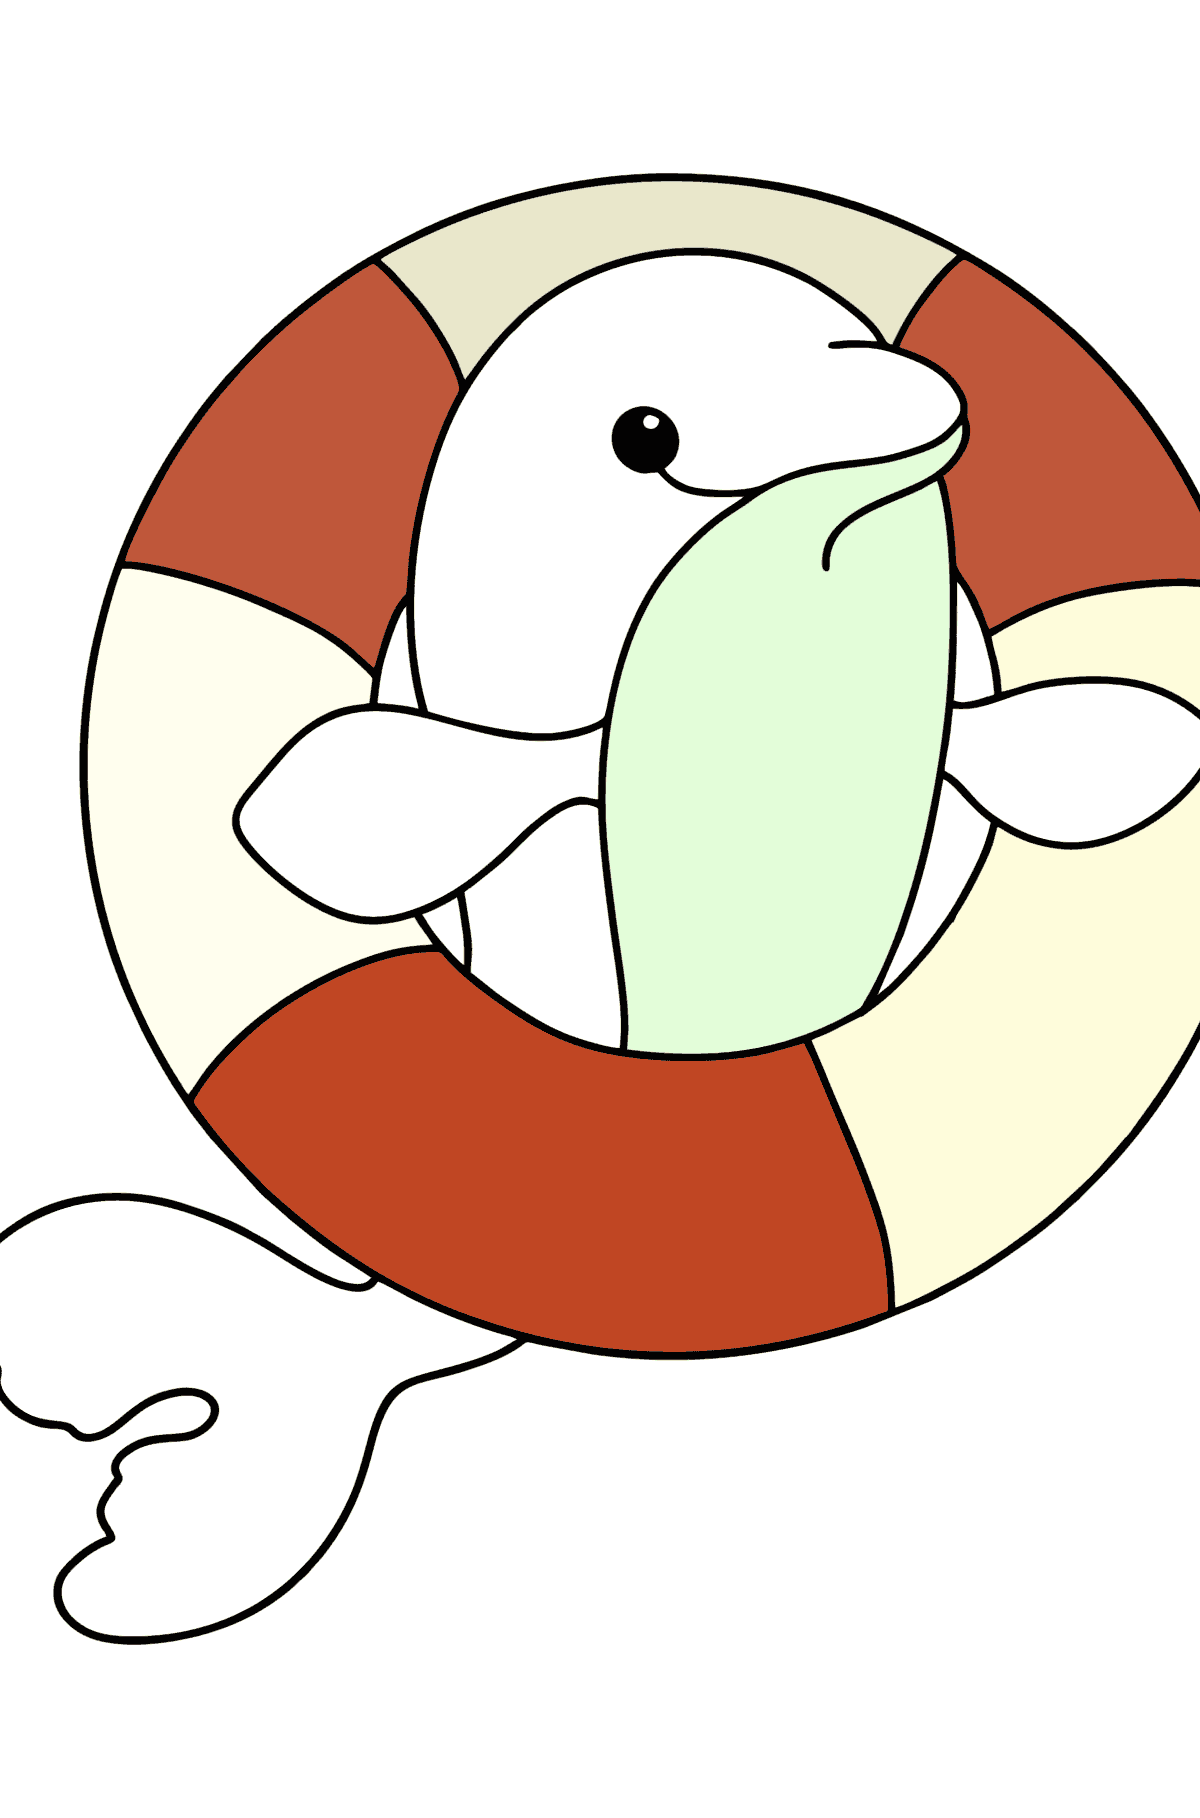 Dolphin with Life Buoy coloring page - Coloring Pages for Kids